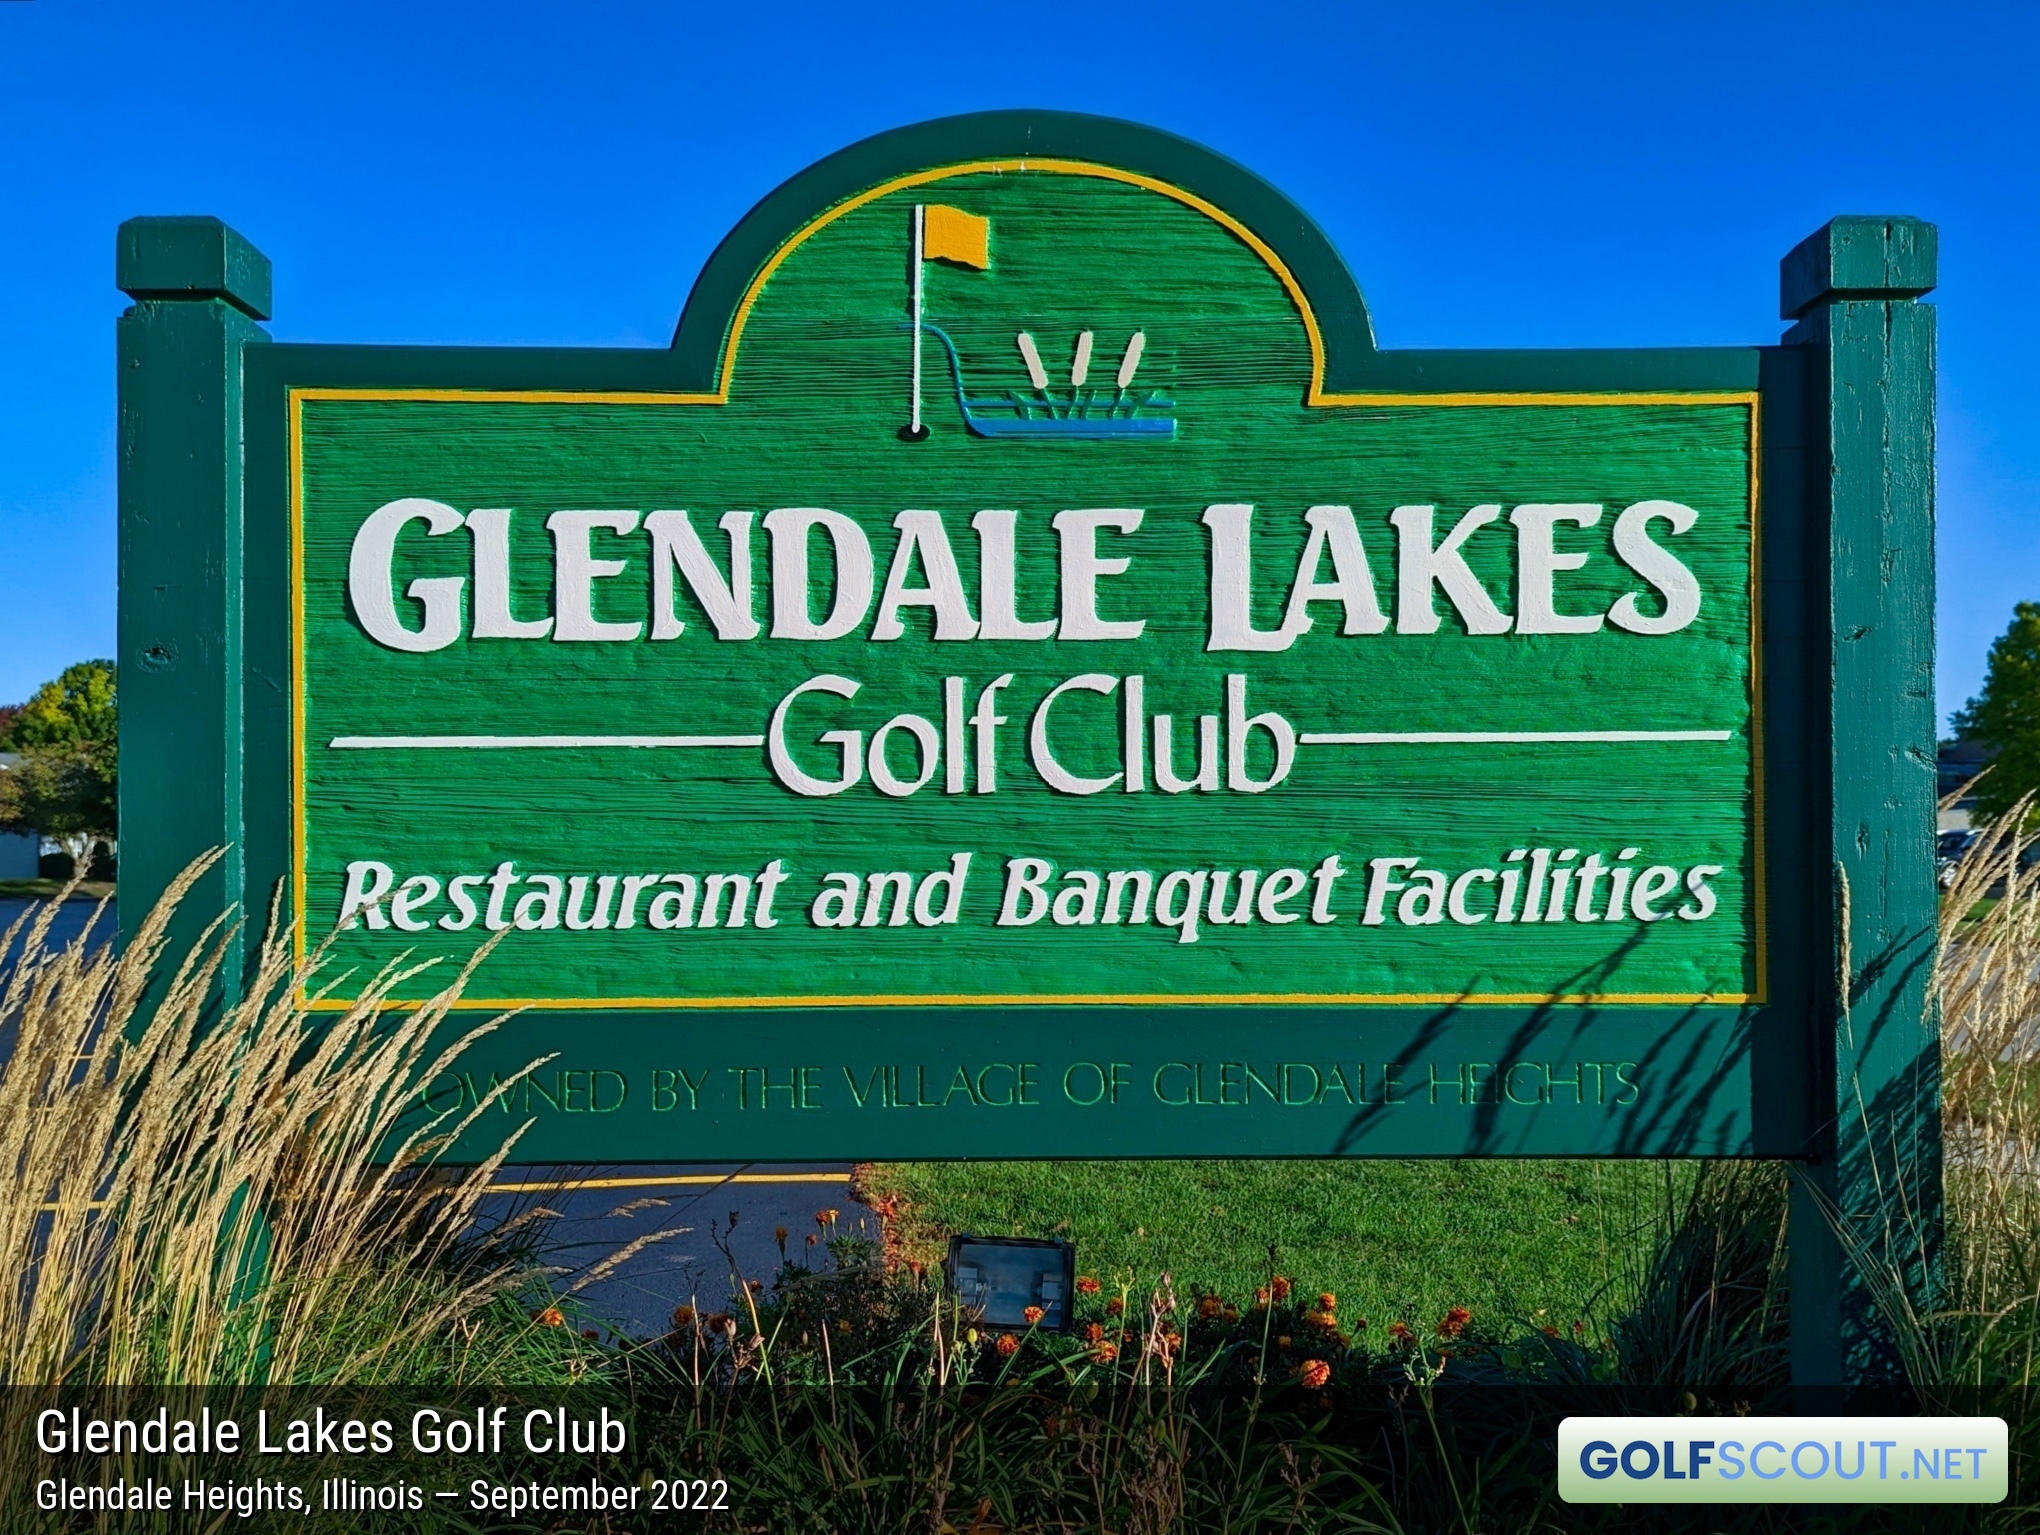 Sign at the entrance to Glendale Lakes Golf Club